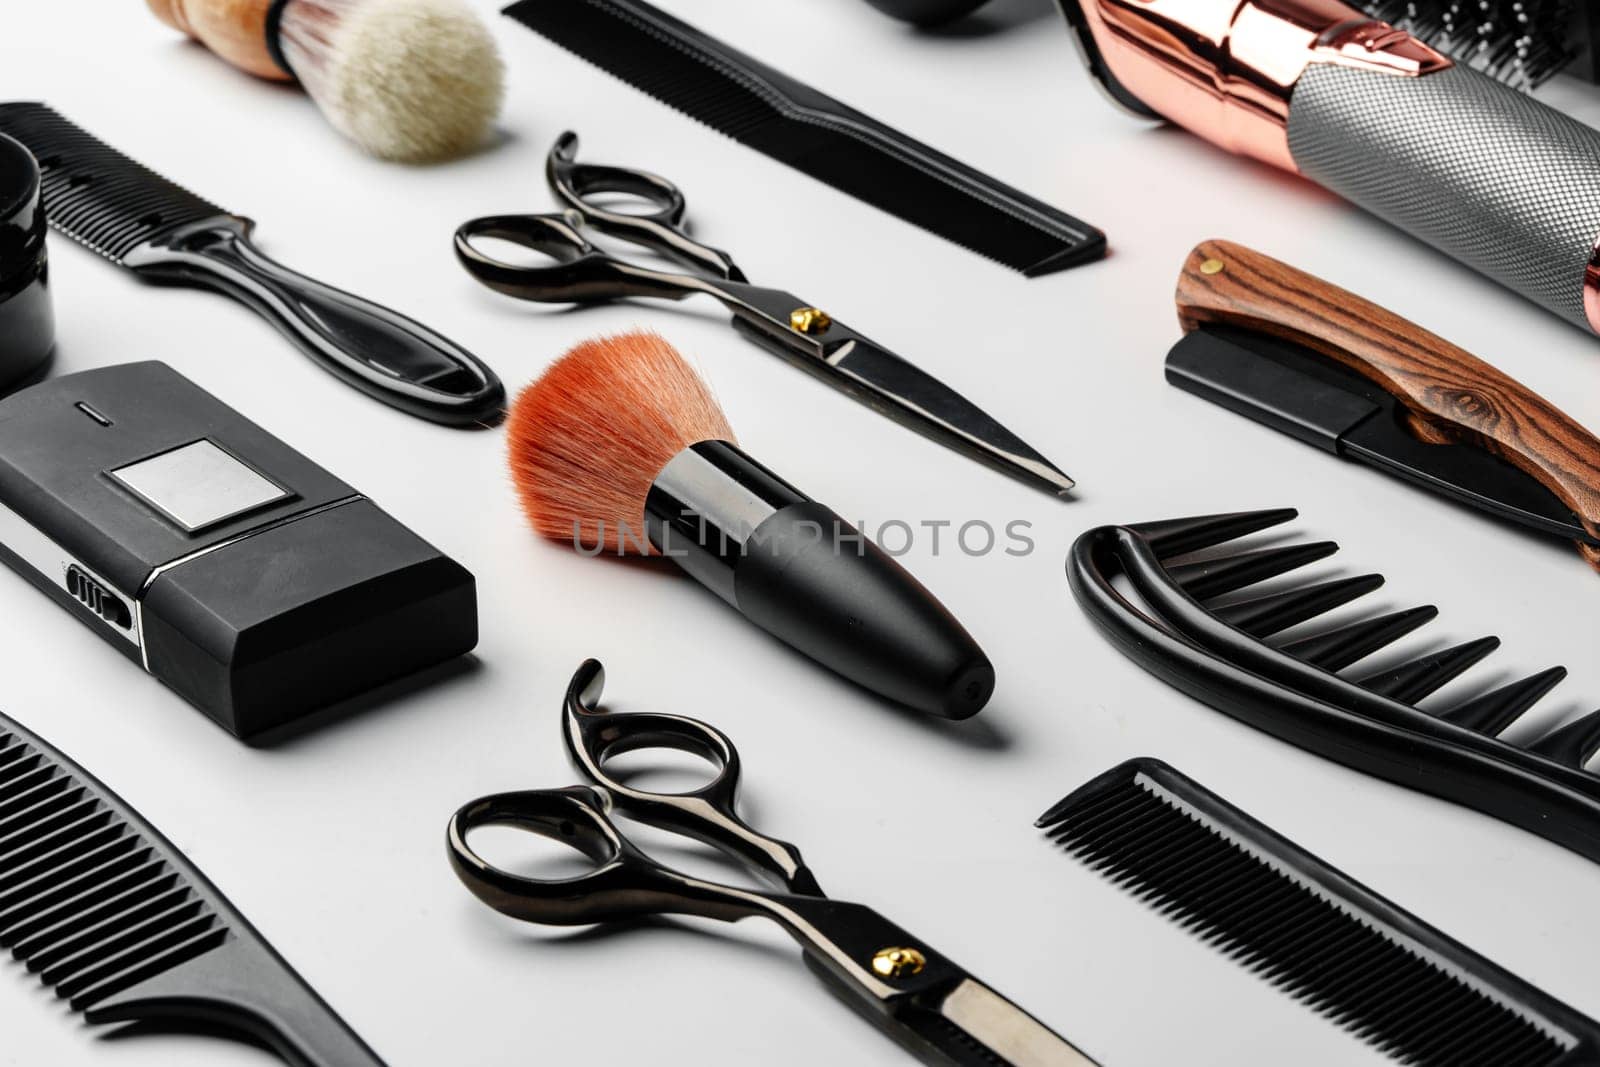 Pattern of various shaving and bauty care accessories for men on gray background flat lay